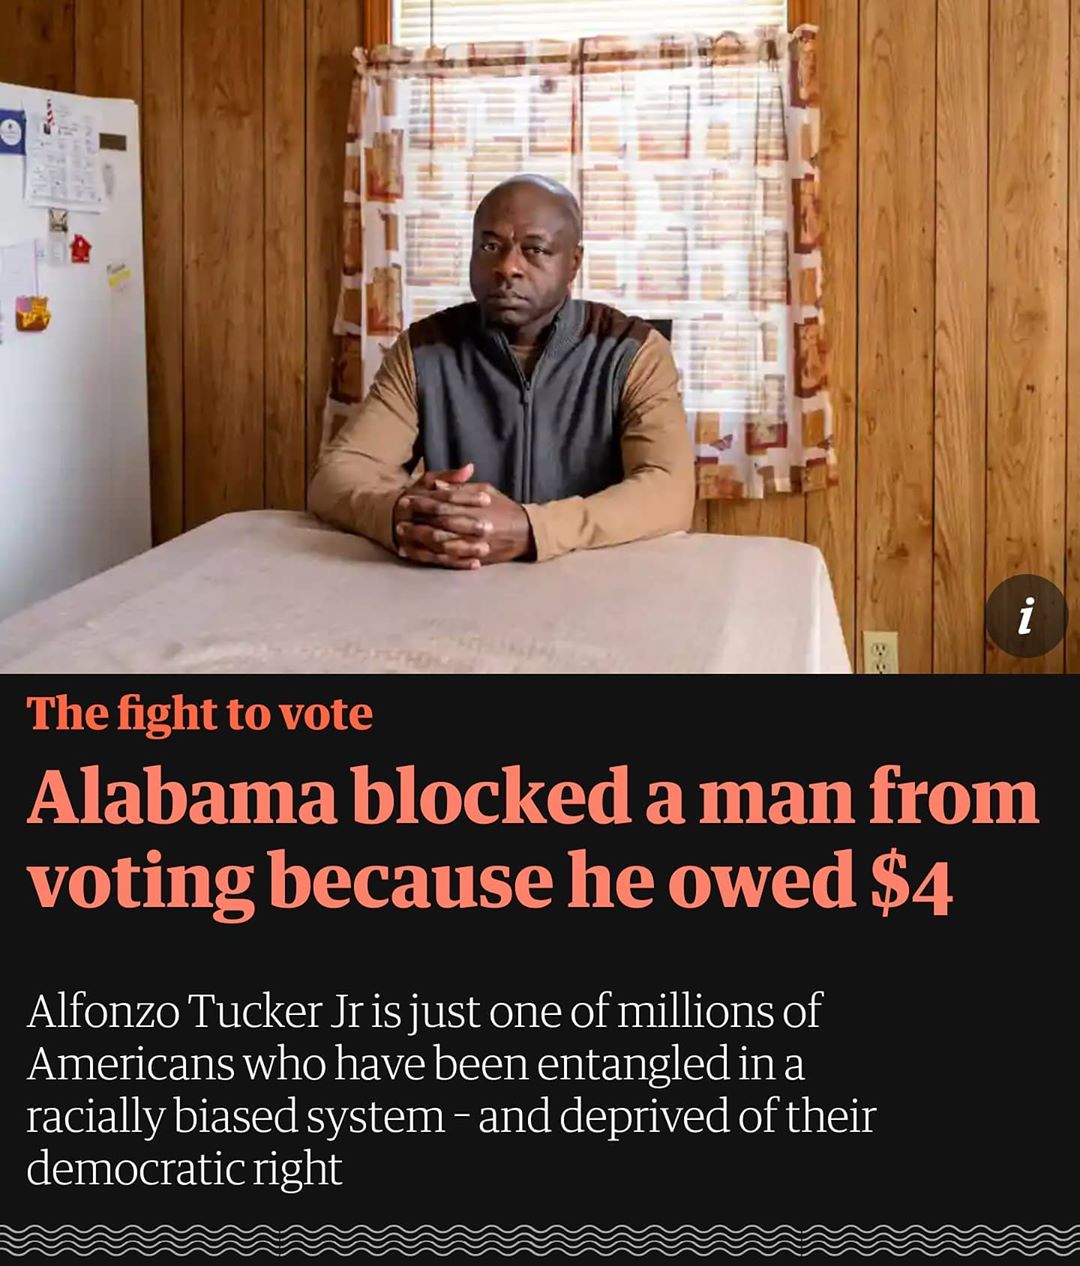 furniture - The fight to vote Alabama blocked a man from voting because he owed $4 Alfonzo Tucker Jr is just one of millions of Americans who have been entangled in a racially biased systemand deprived of their democratic right